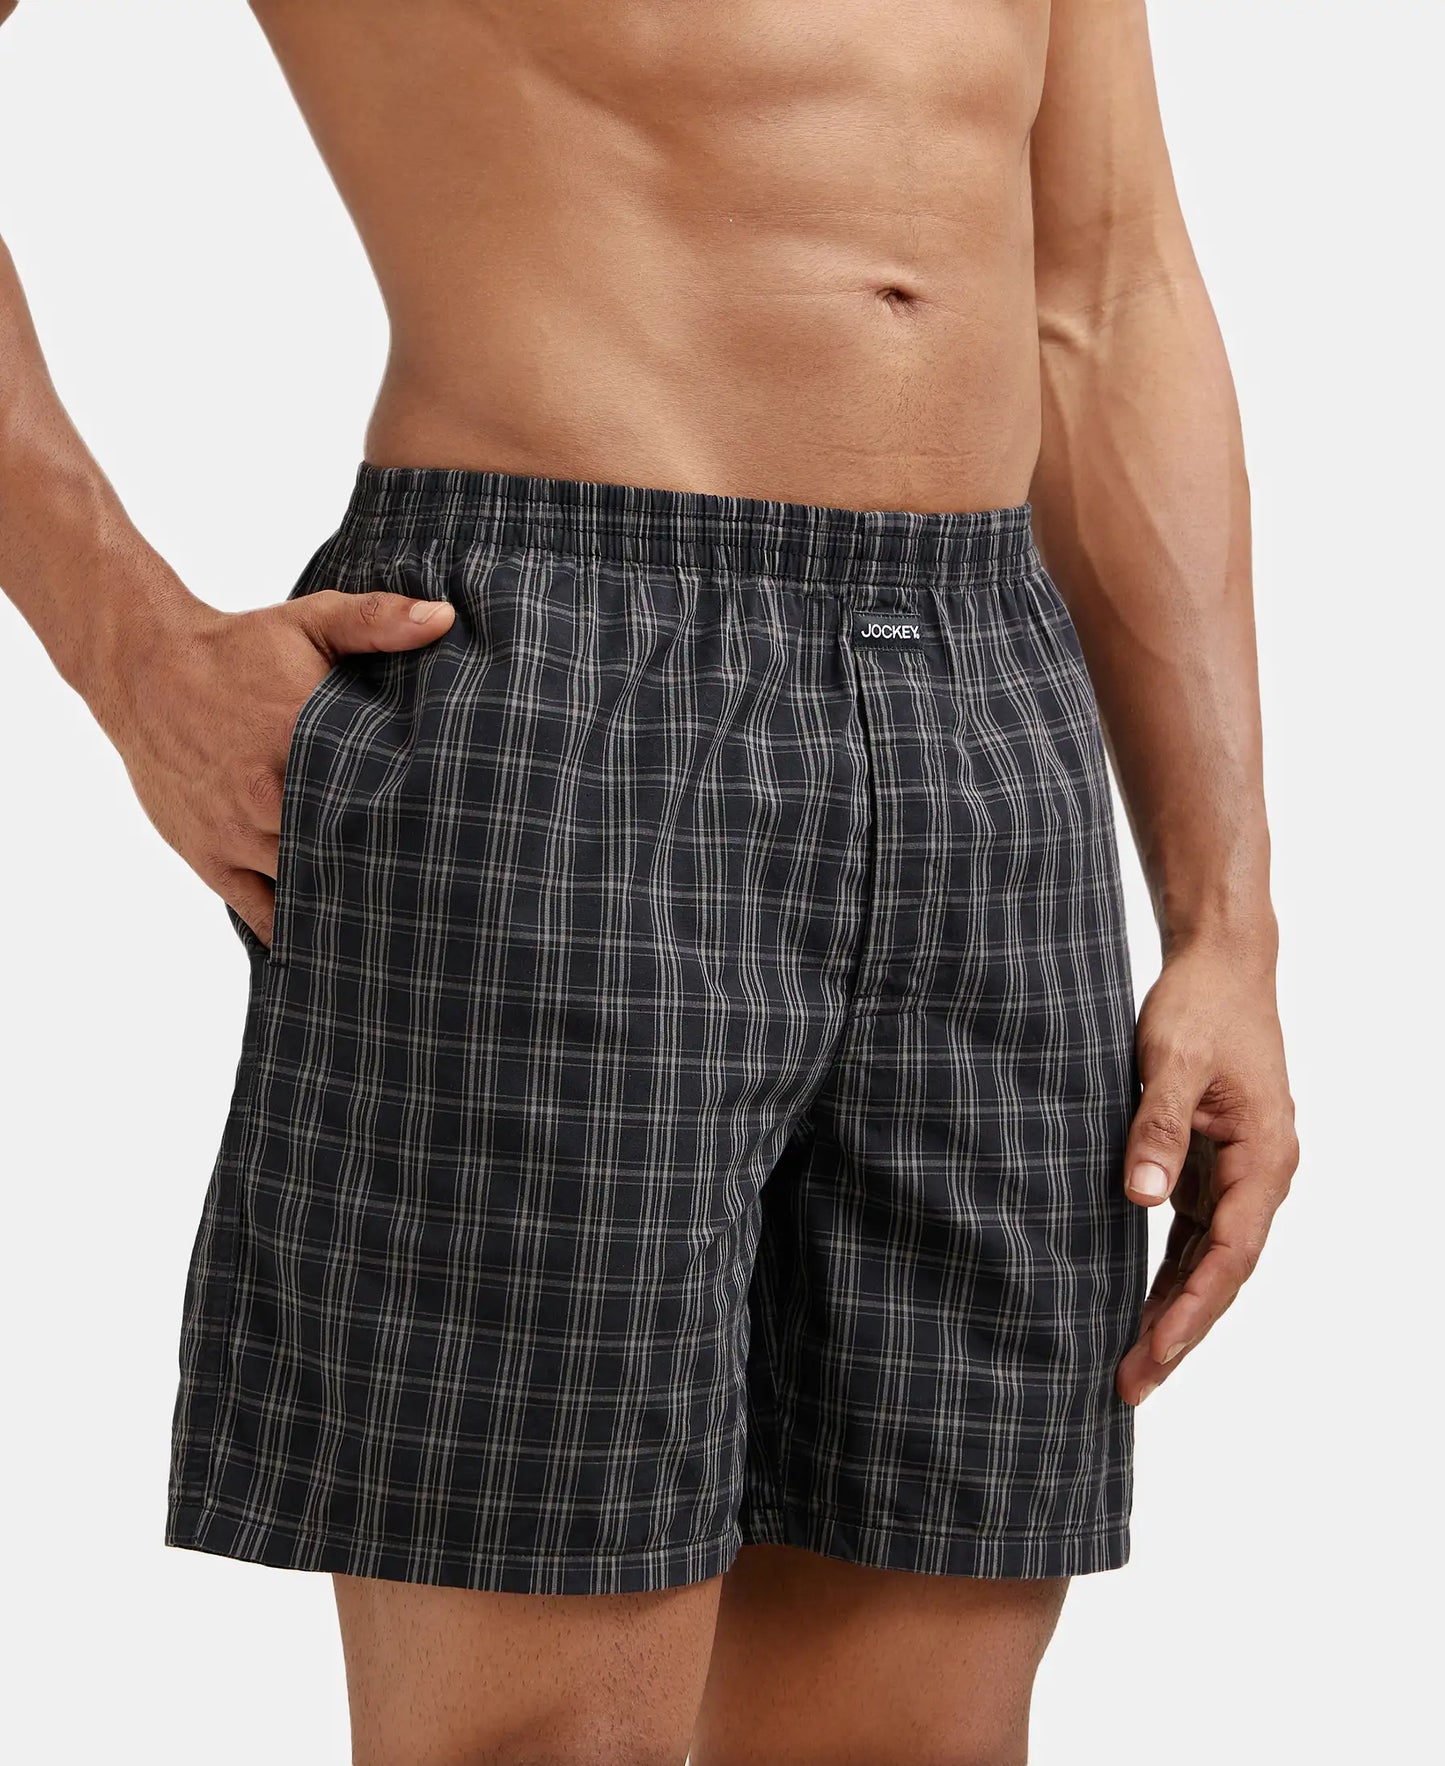 Super Combed Mercerized Cotton Woven Checkered Boxer Shorts with Side Pocket - Navy & Black(Pack of 2)